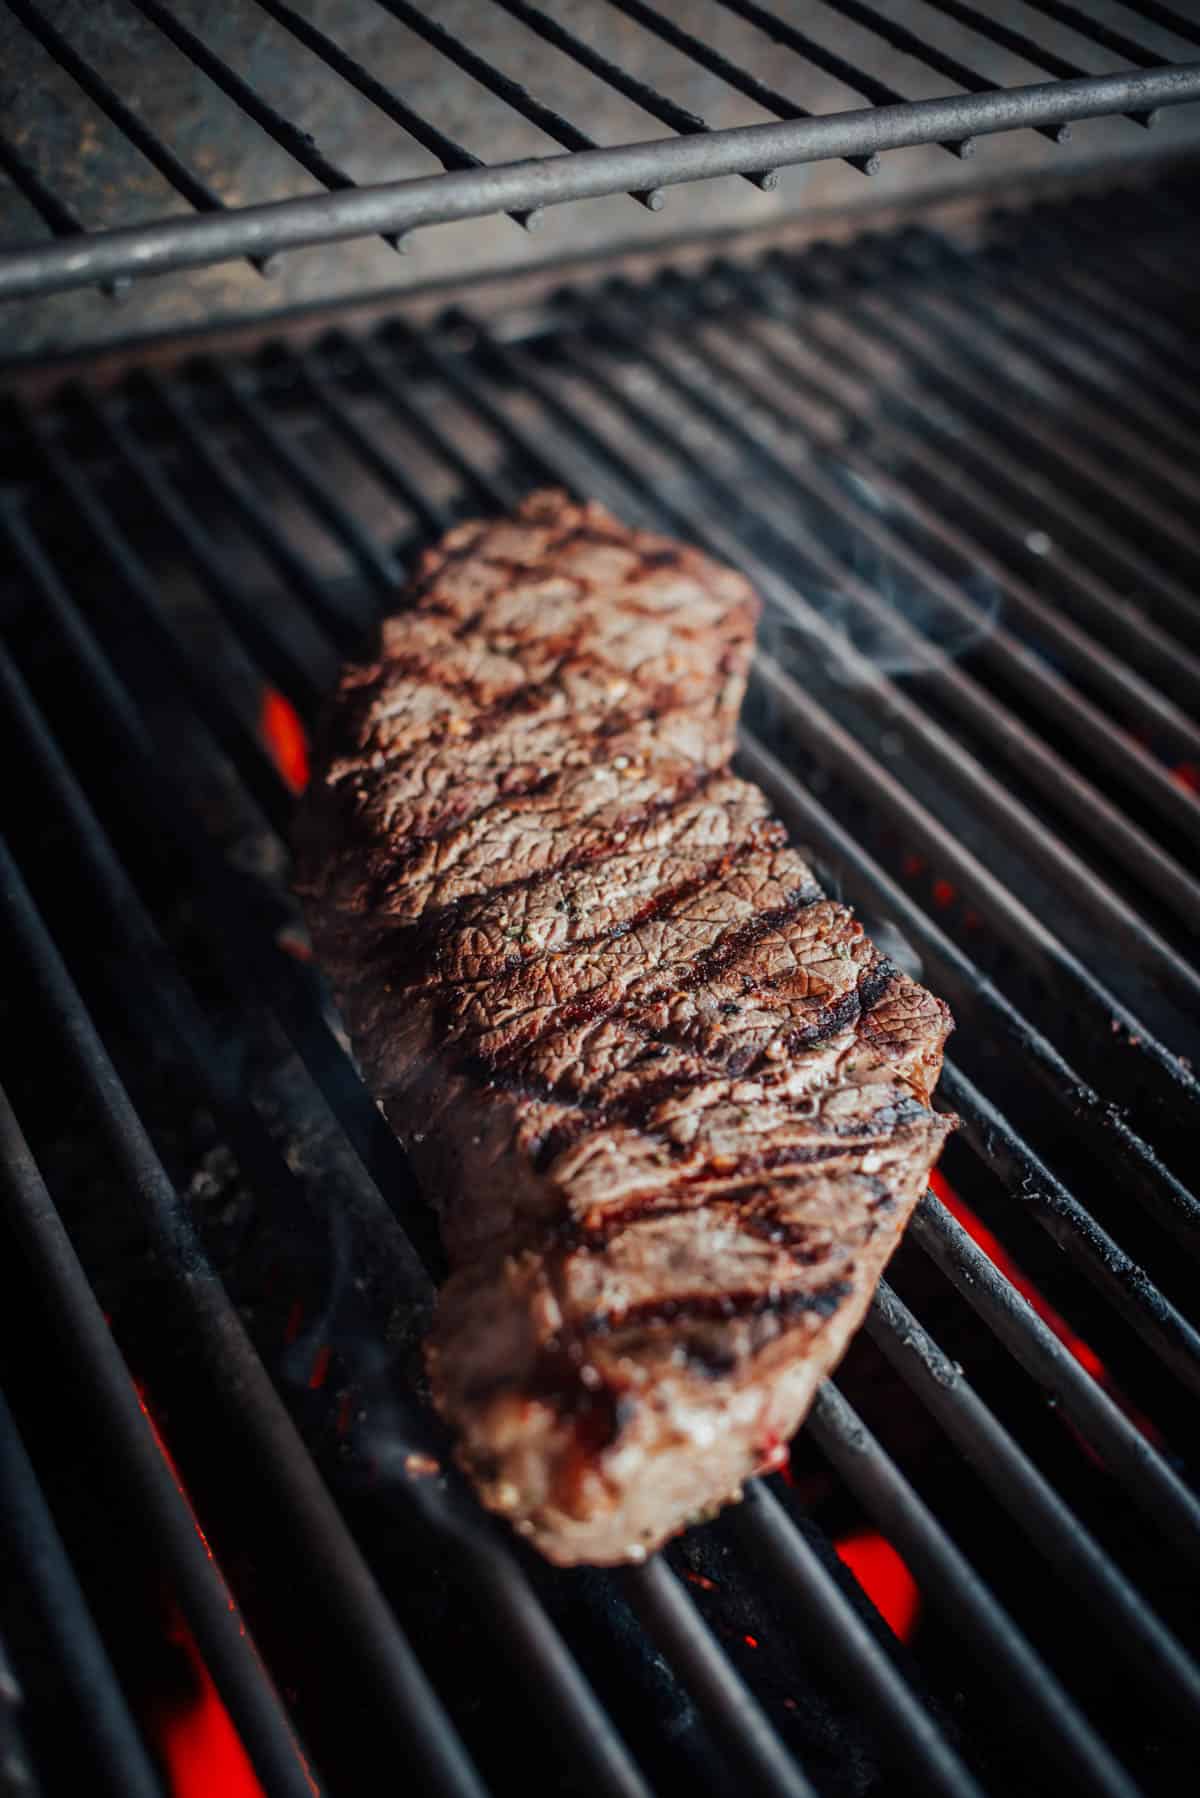 A london broil being grilled on an open flame grill, with visible char marks and red-hot coals underneath.